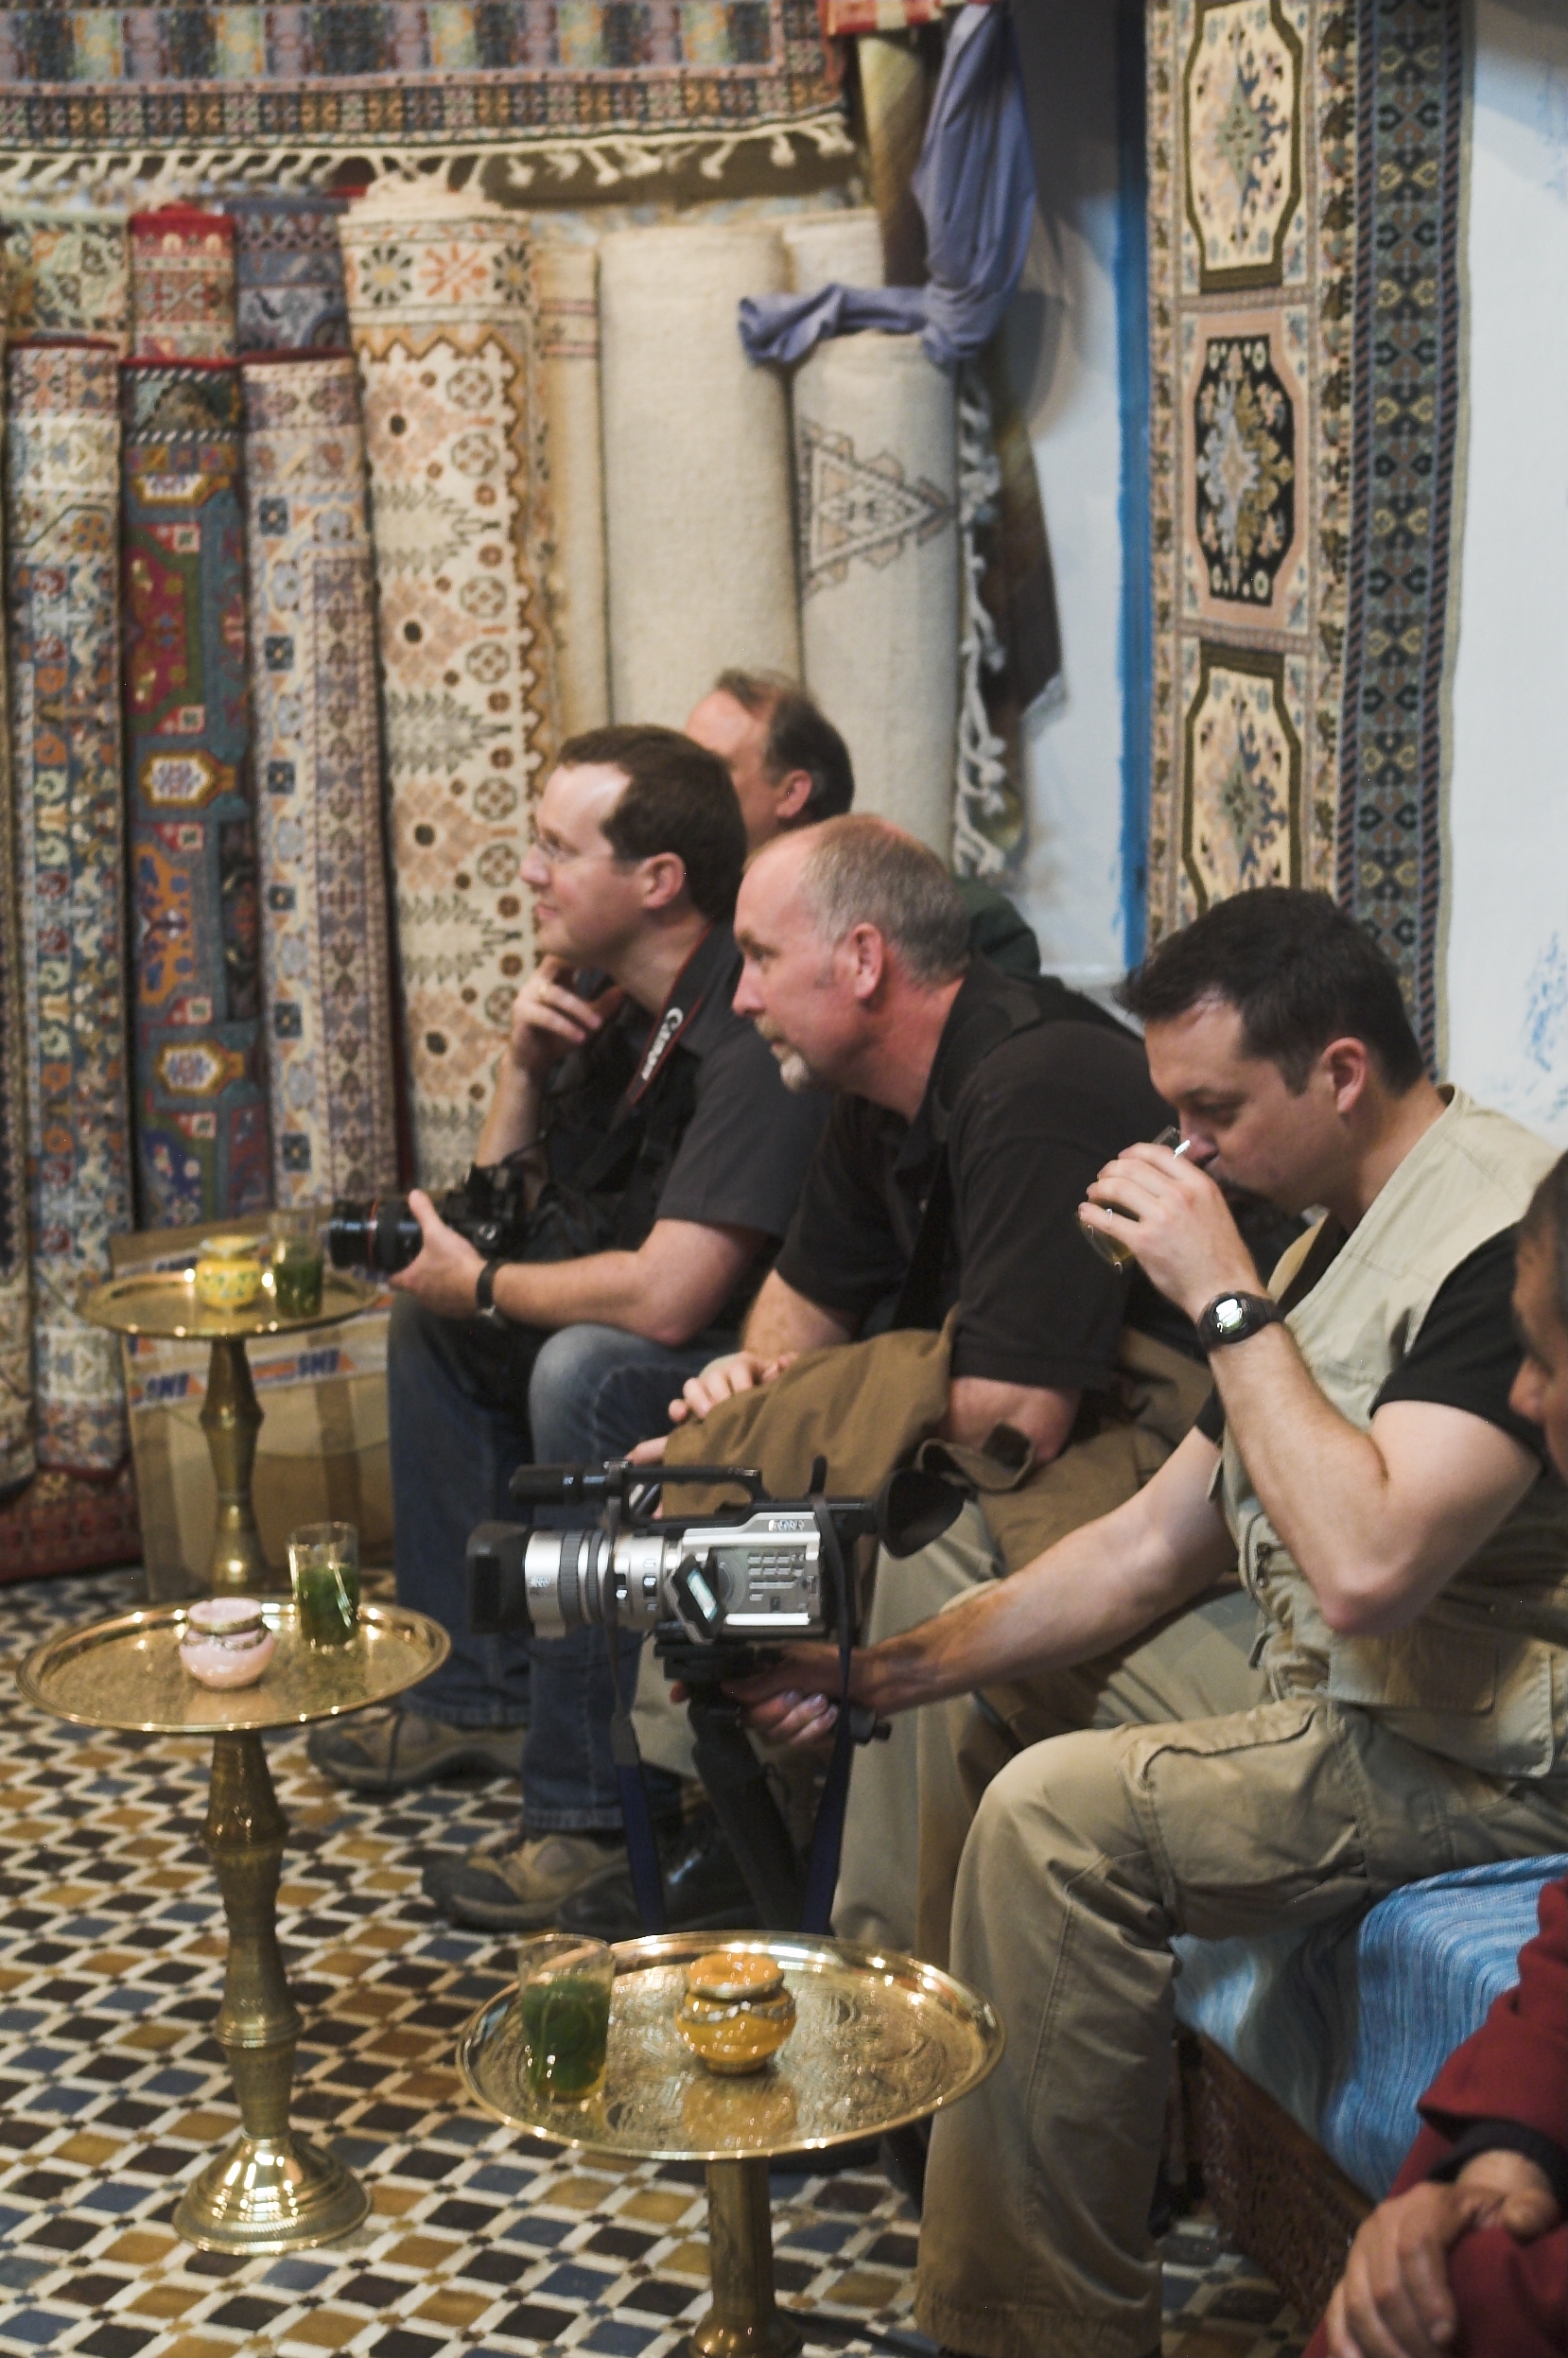 On location in Morocco.